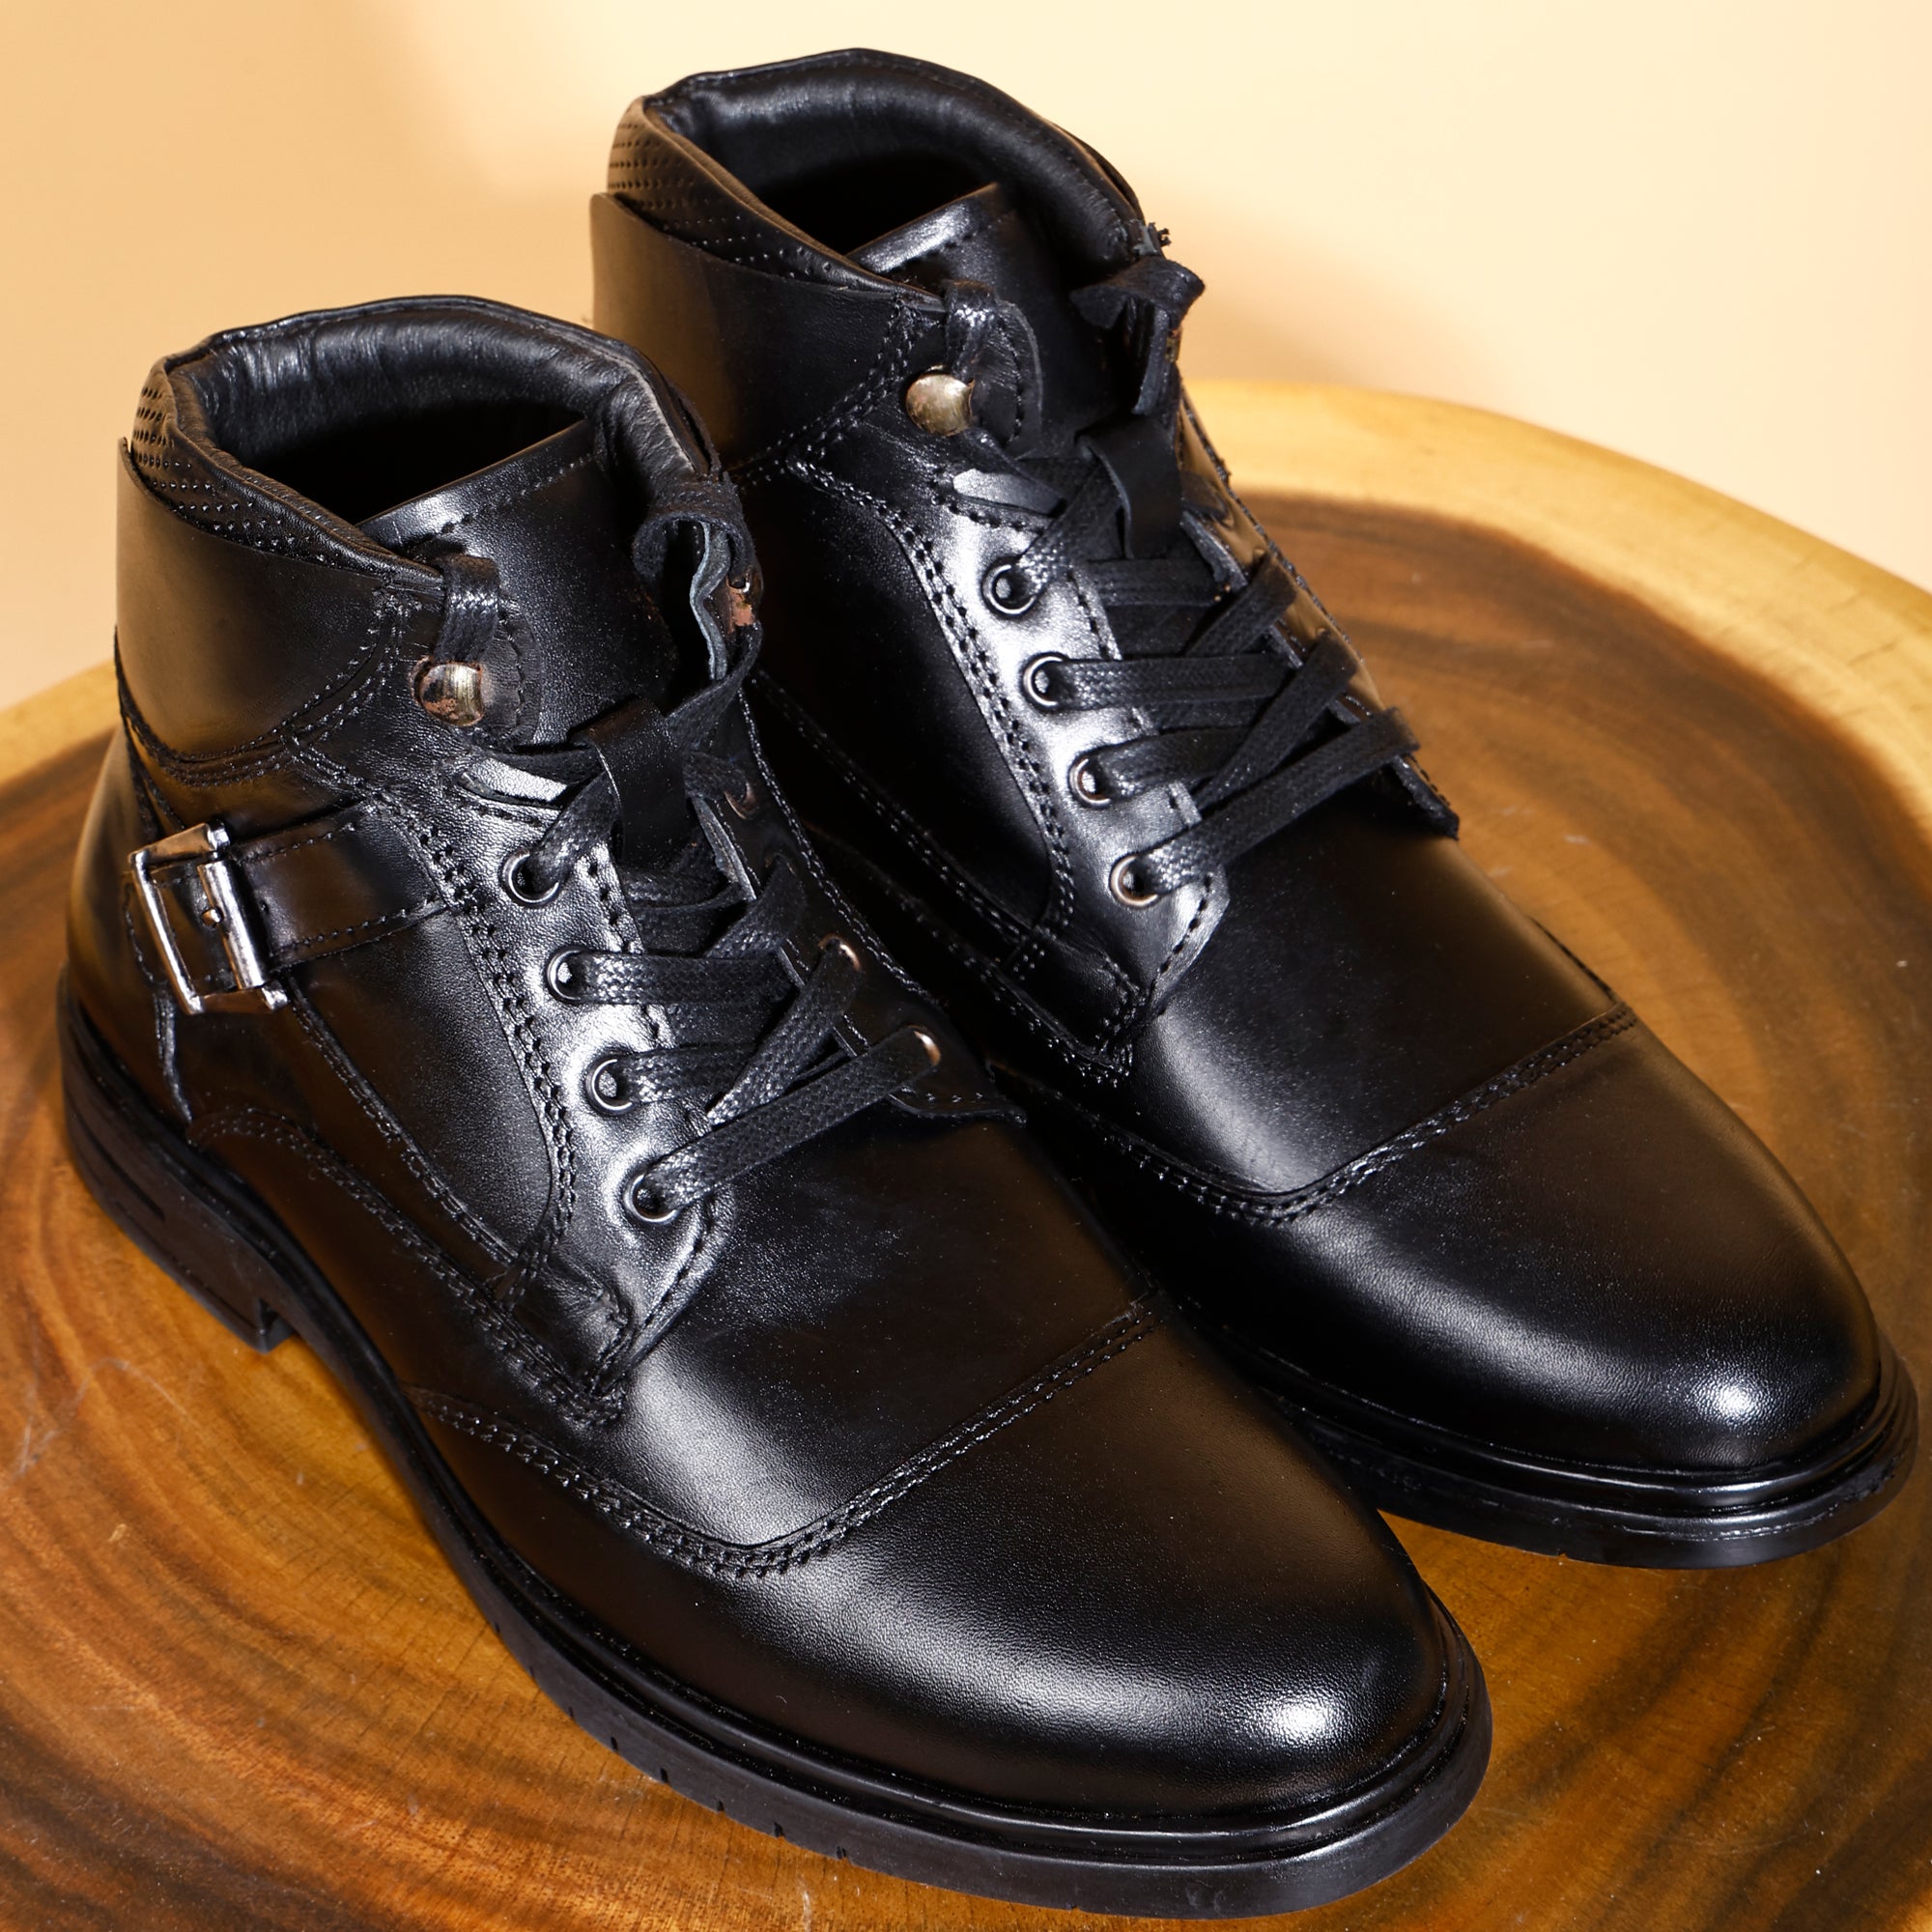 Handcrafted Italian Leather High Ankle Biking Boots ( LB05)